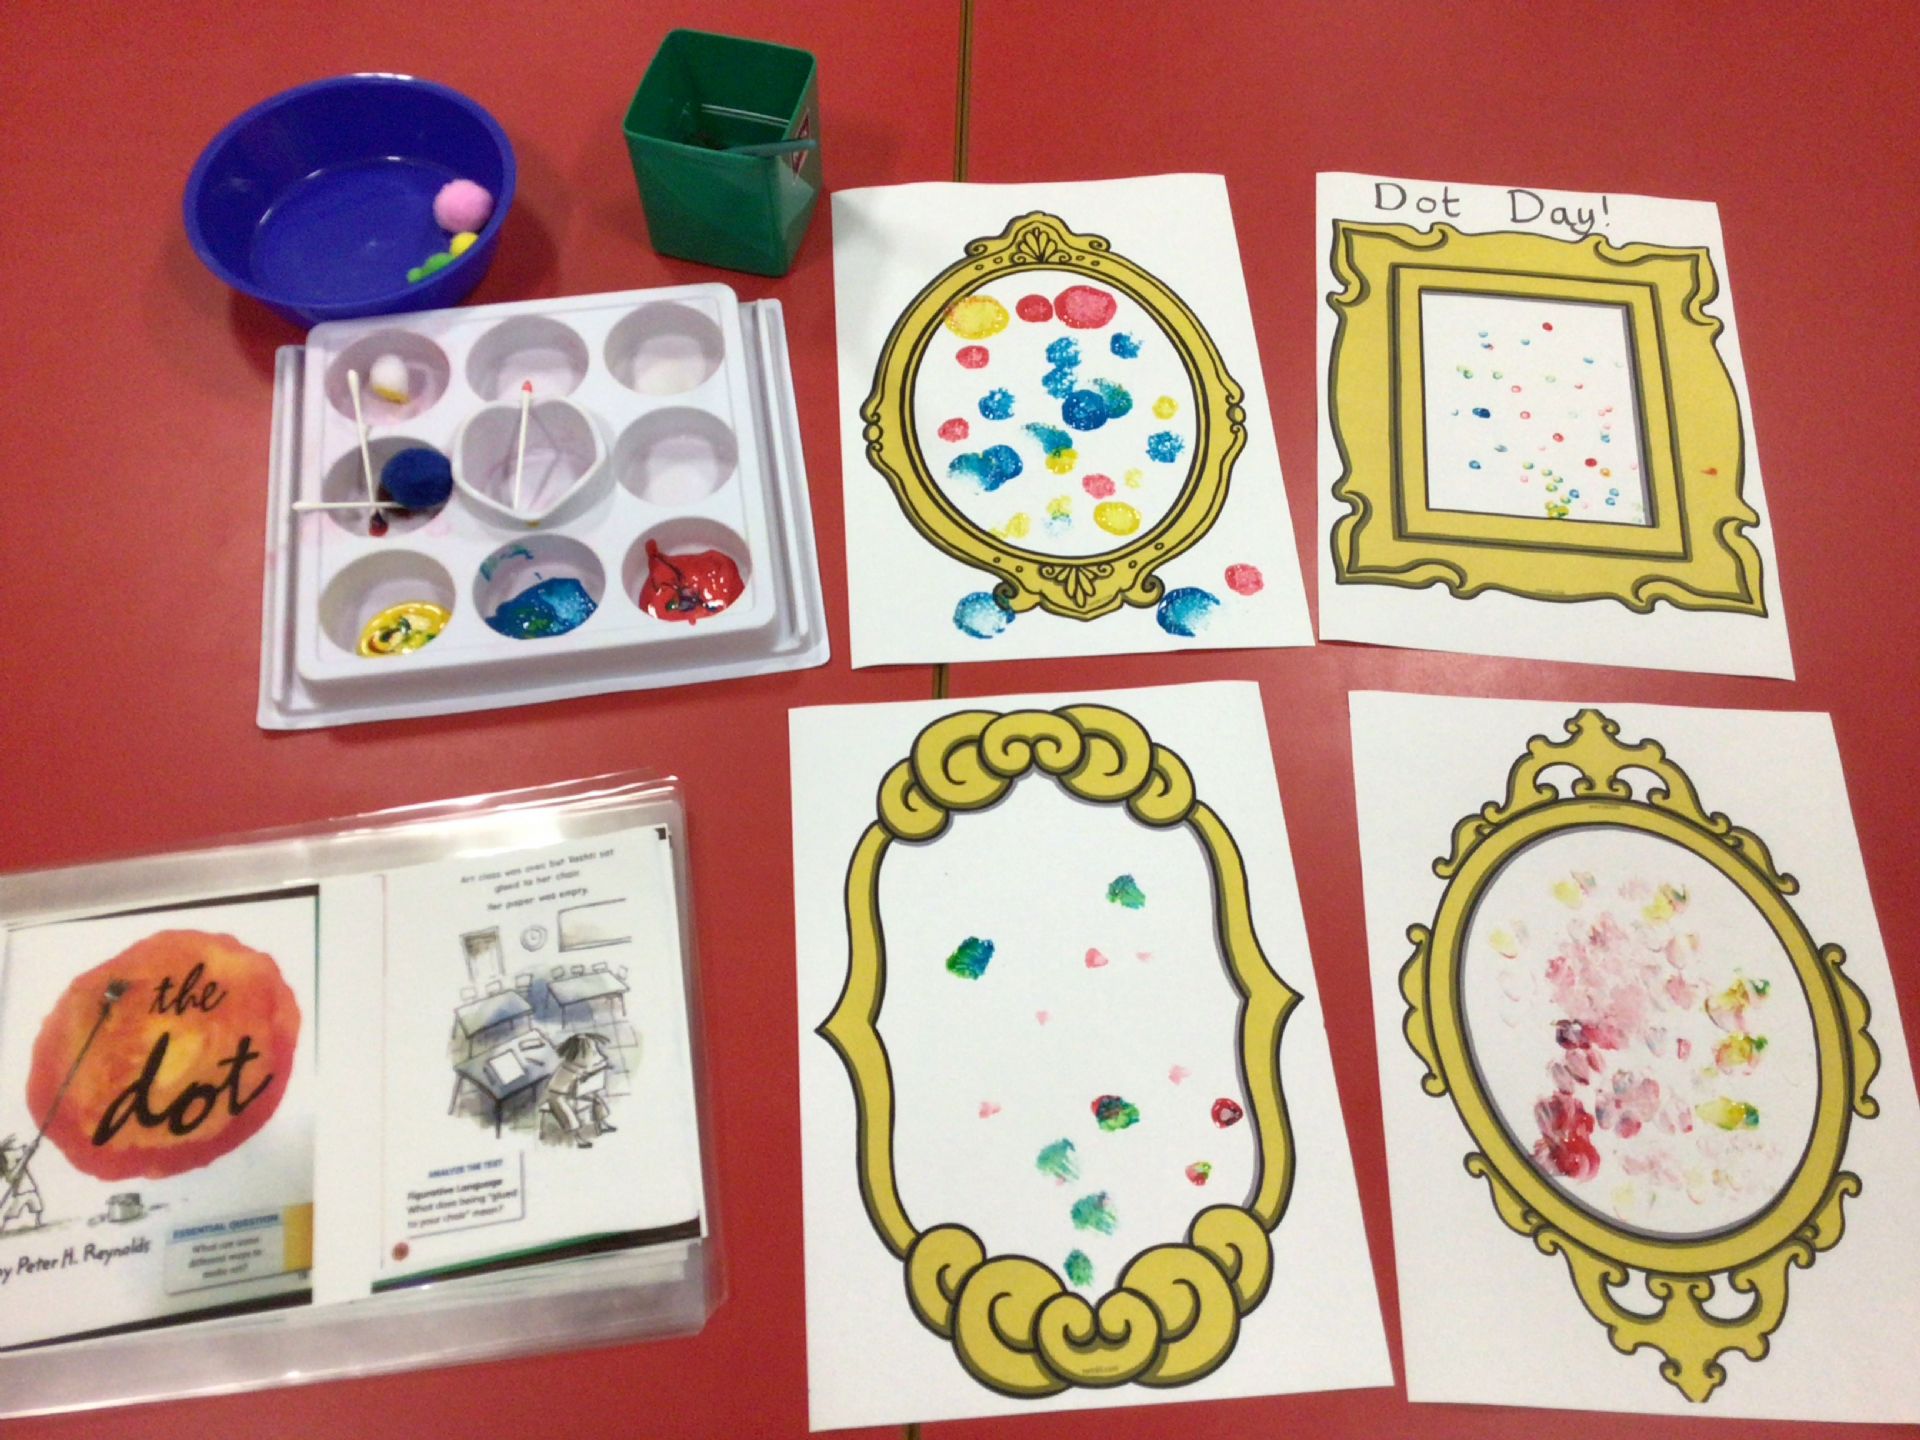 Today we experimented with making dots at Addenbrooke's using Pom poms, cotton buds and paint brushes. We also experimented with mixing different colours together. Our dot pictures are in gold frames just like Vashti's!